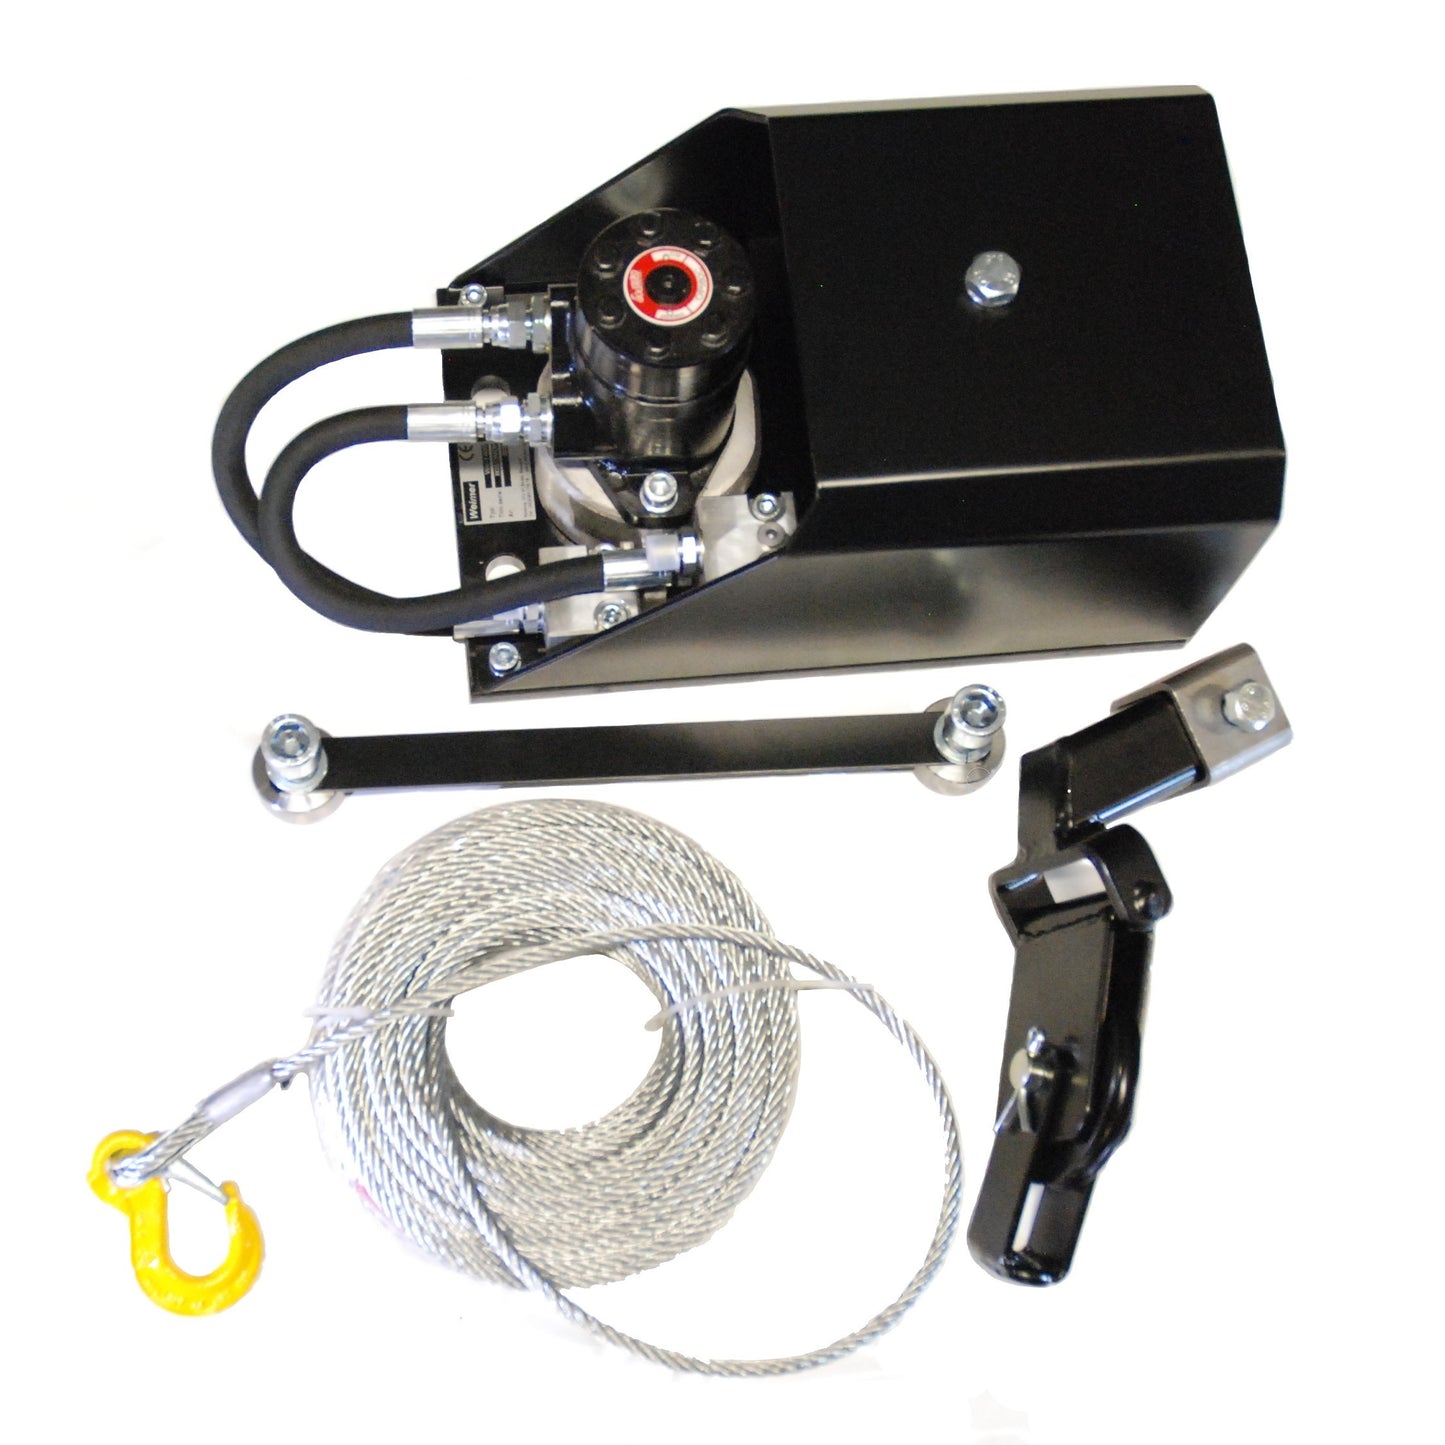 Winch We-1700 M3 excl. hose, valve and radio